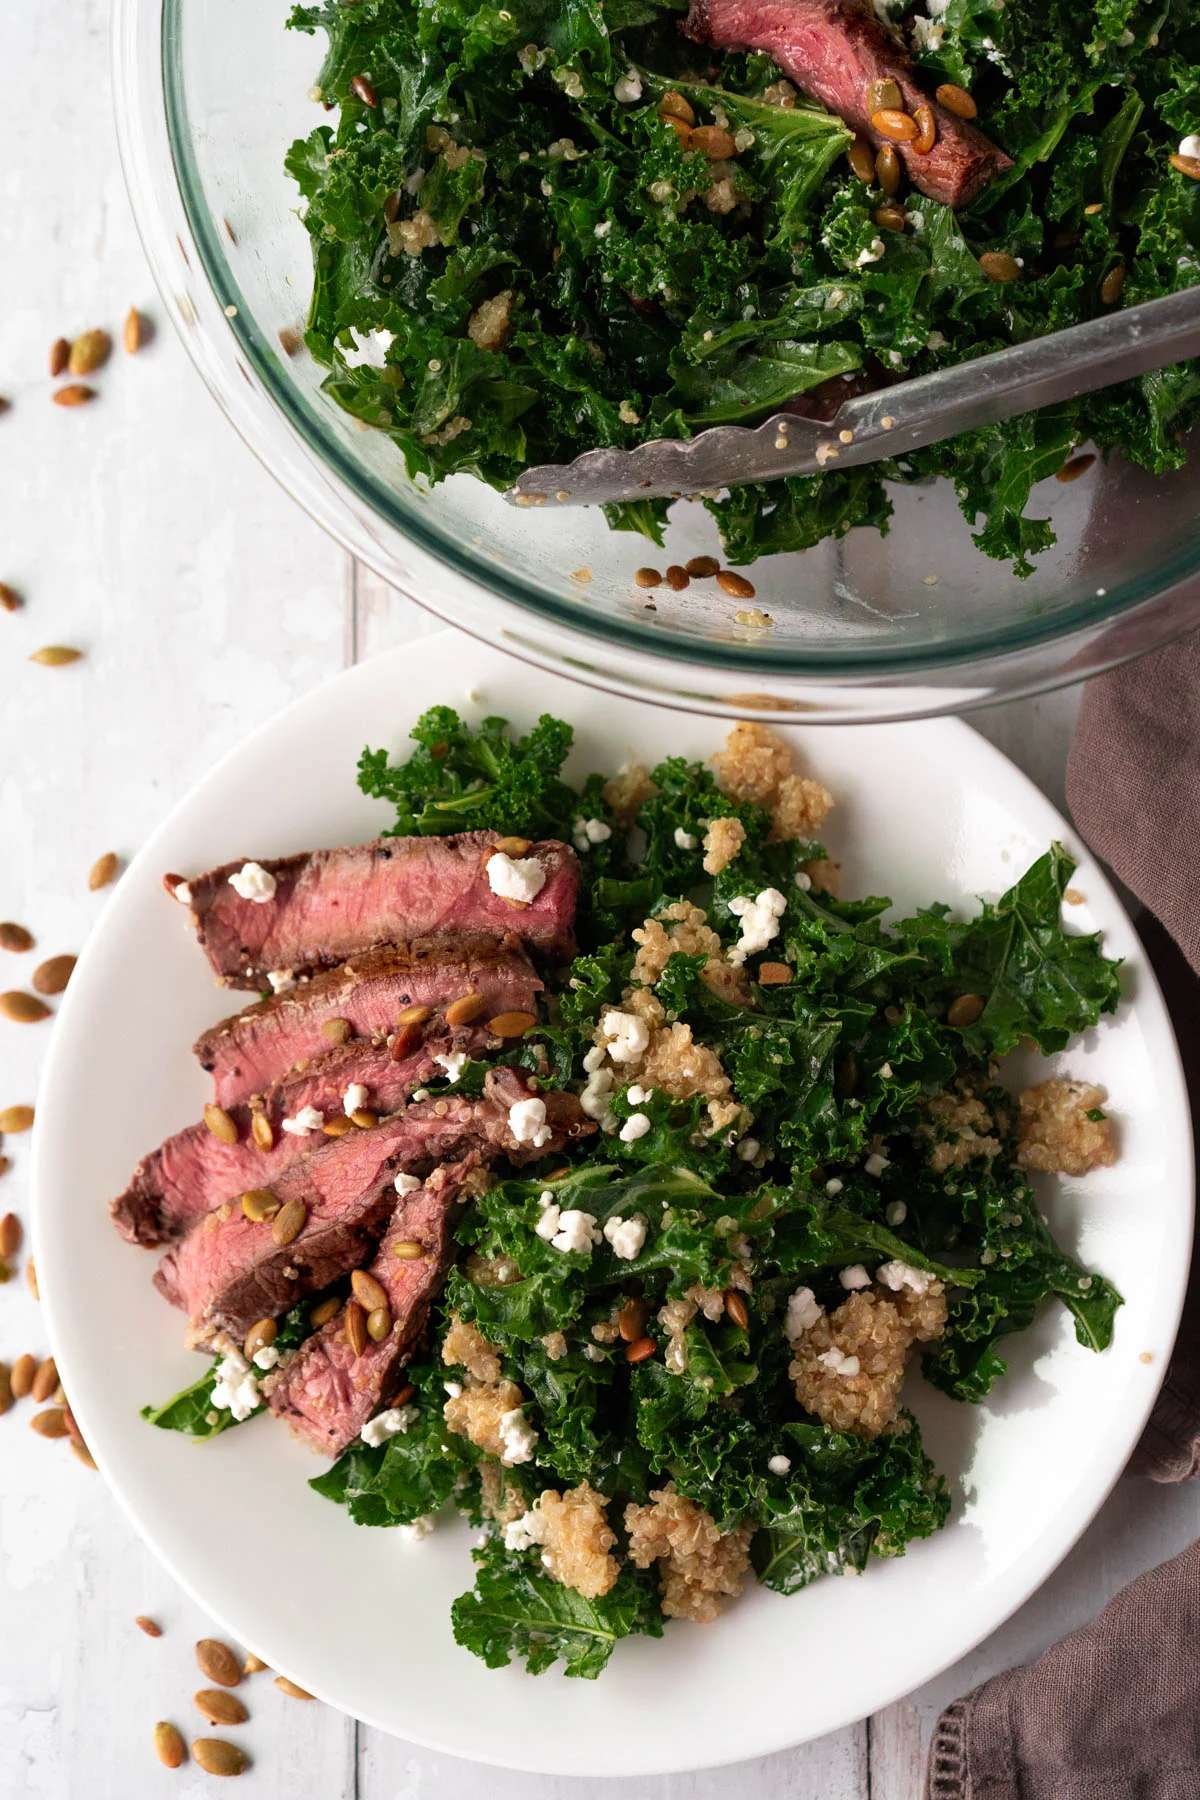 Kale Salad with Quinoa and Steak